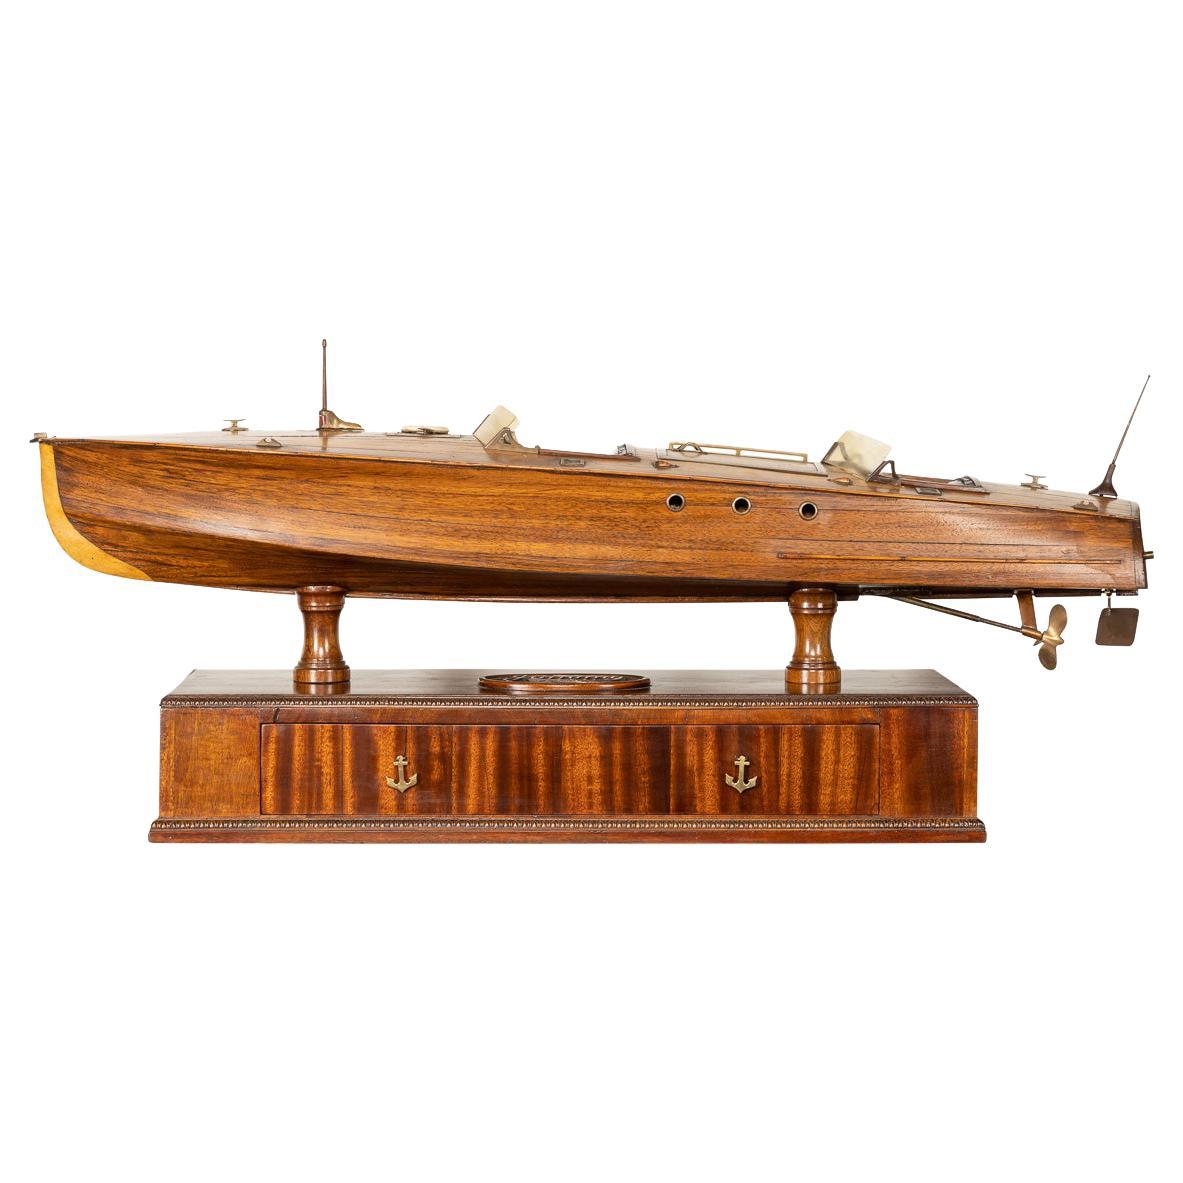 20th Century Mahogany & Rosewood Speed Boat Made in the State Prison, c.1930